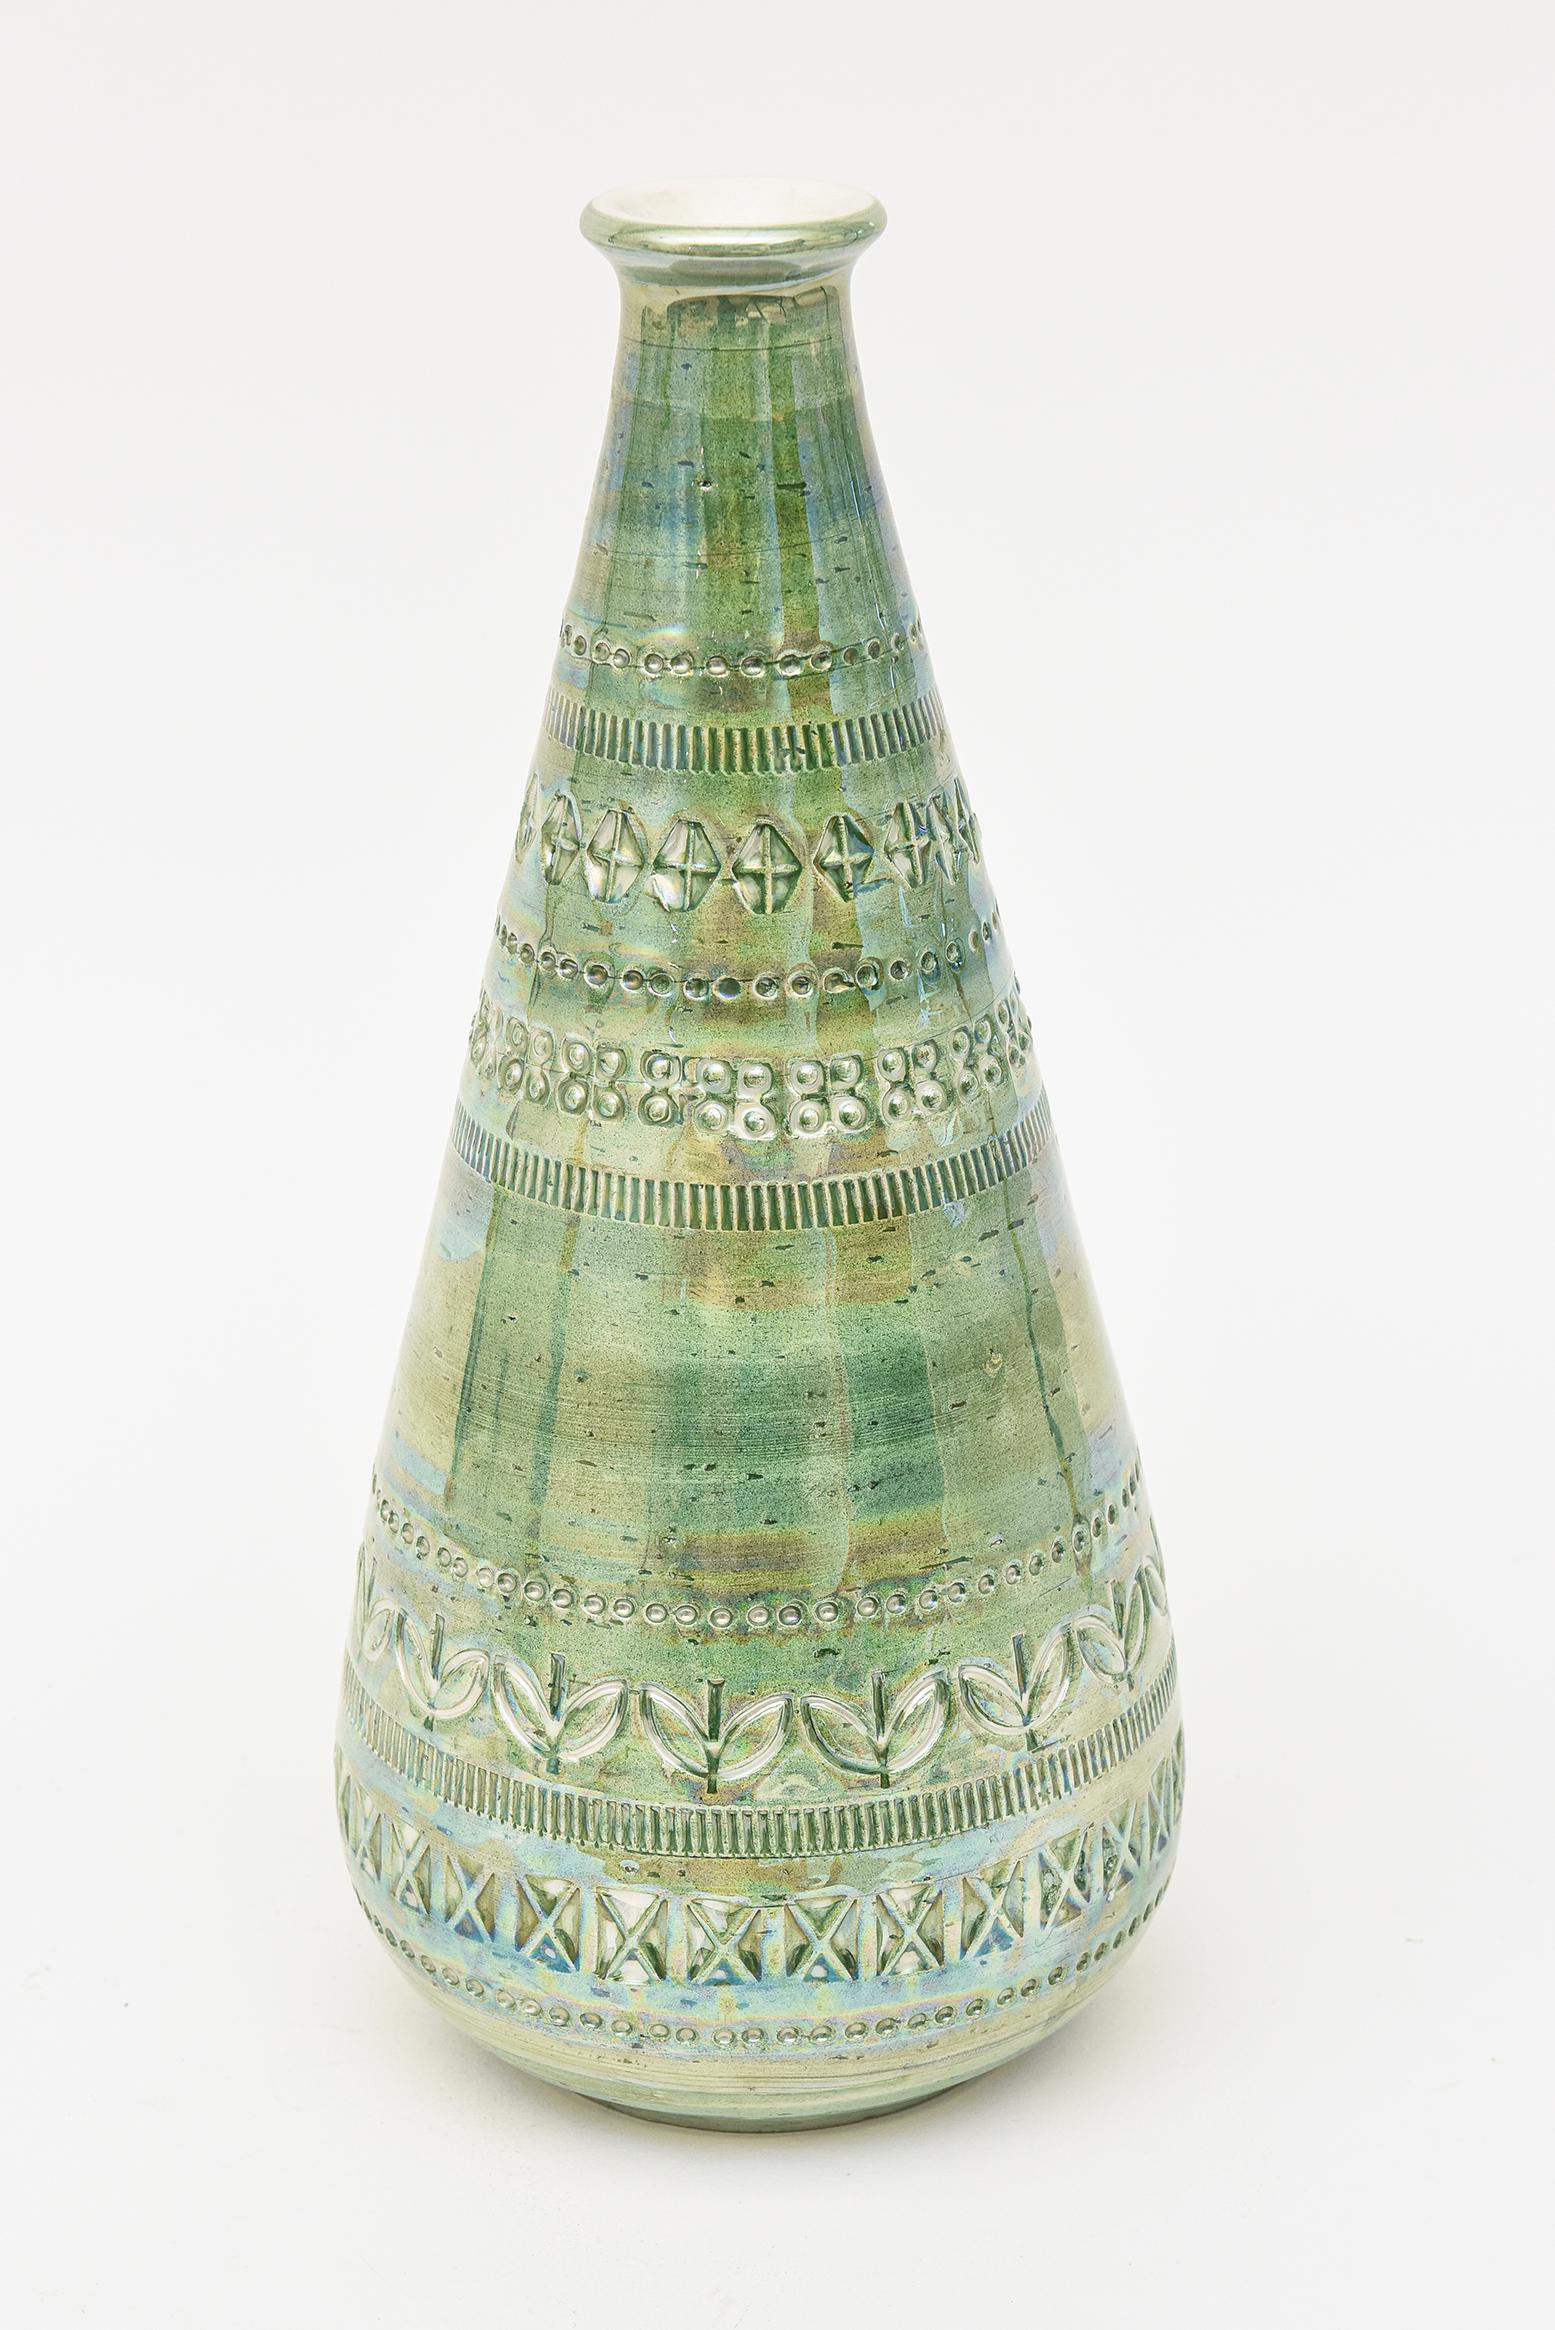 This stunning and rare Italian vintage hallmarked Bitossi glazed ceramic vessel is iridescent and resembling luster ware. This is from the 60's. It has incised designs and the colors are light green, pink, oranges, purples and greens. This is oh so